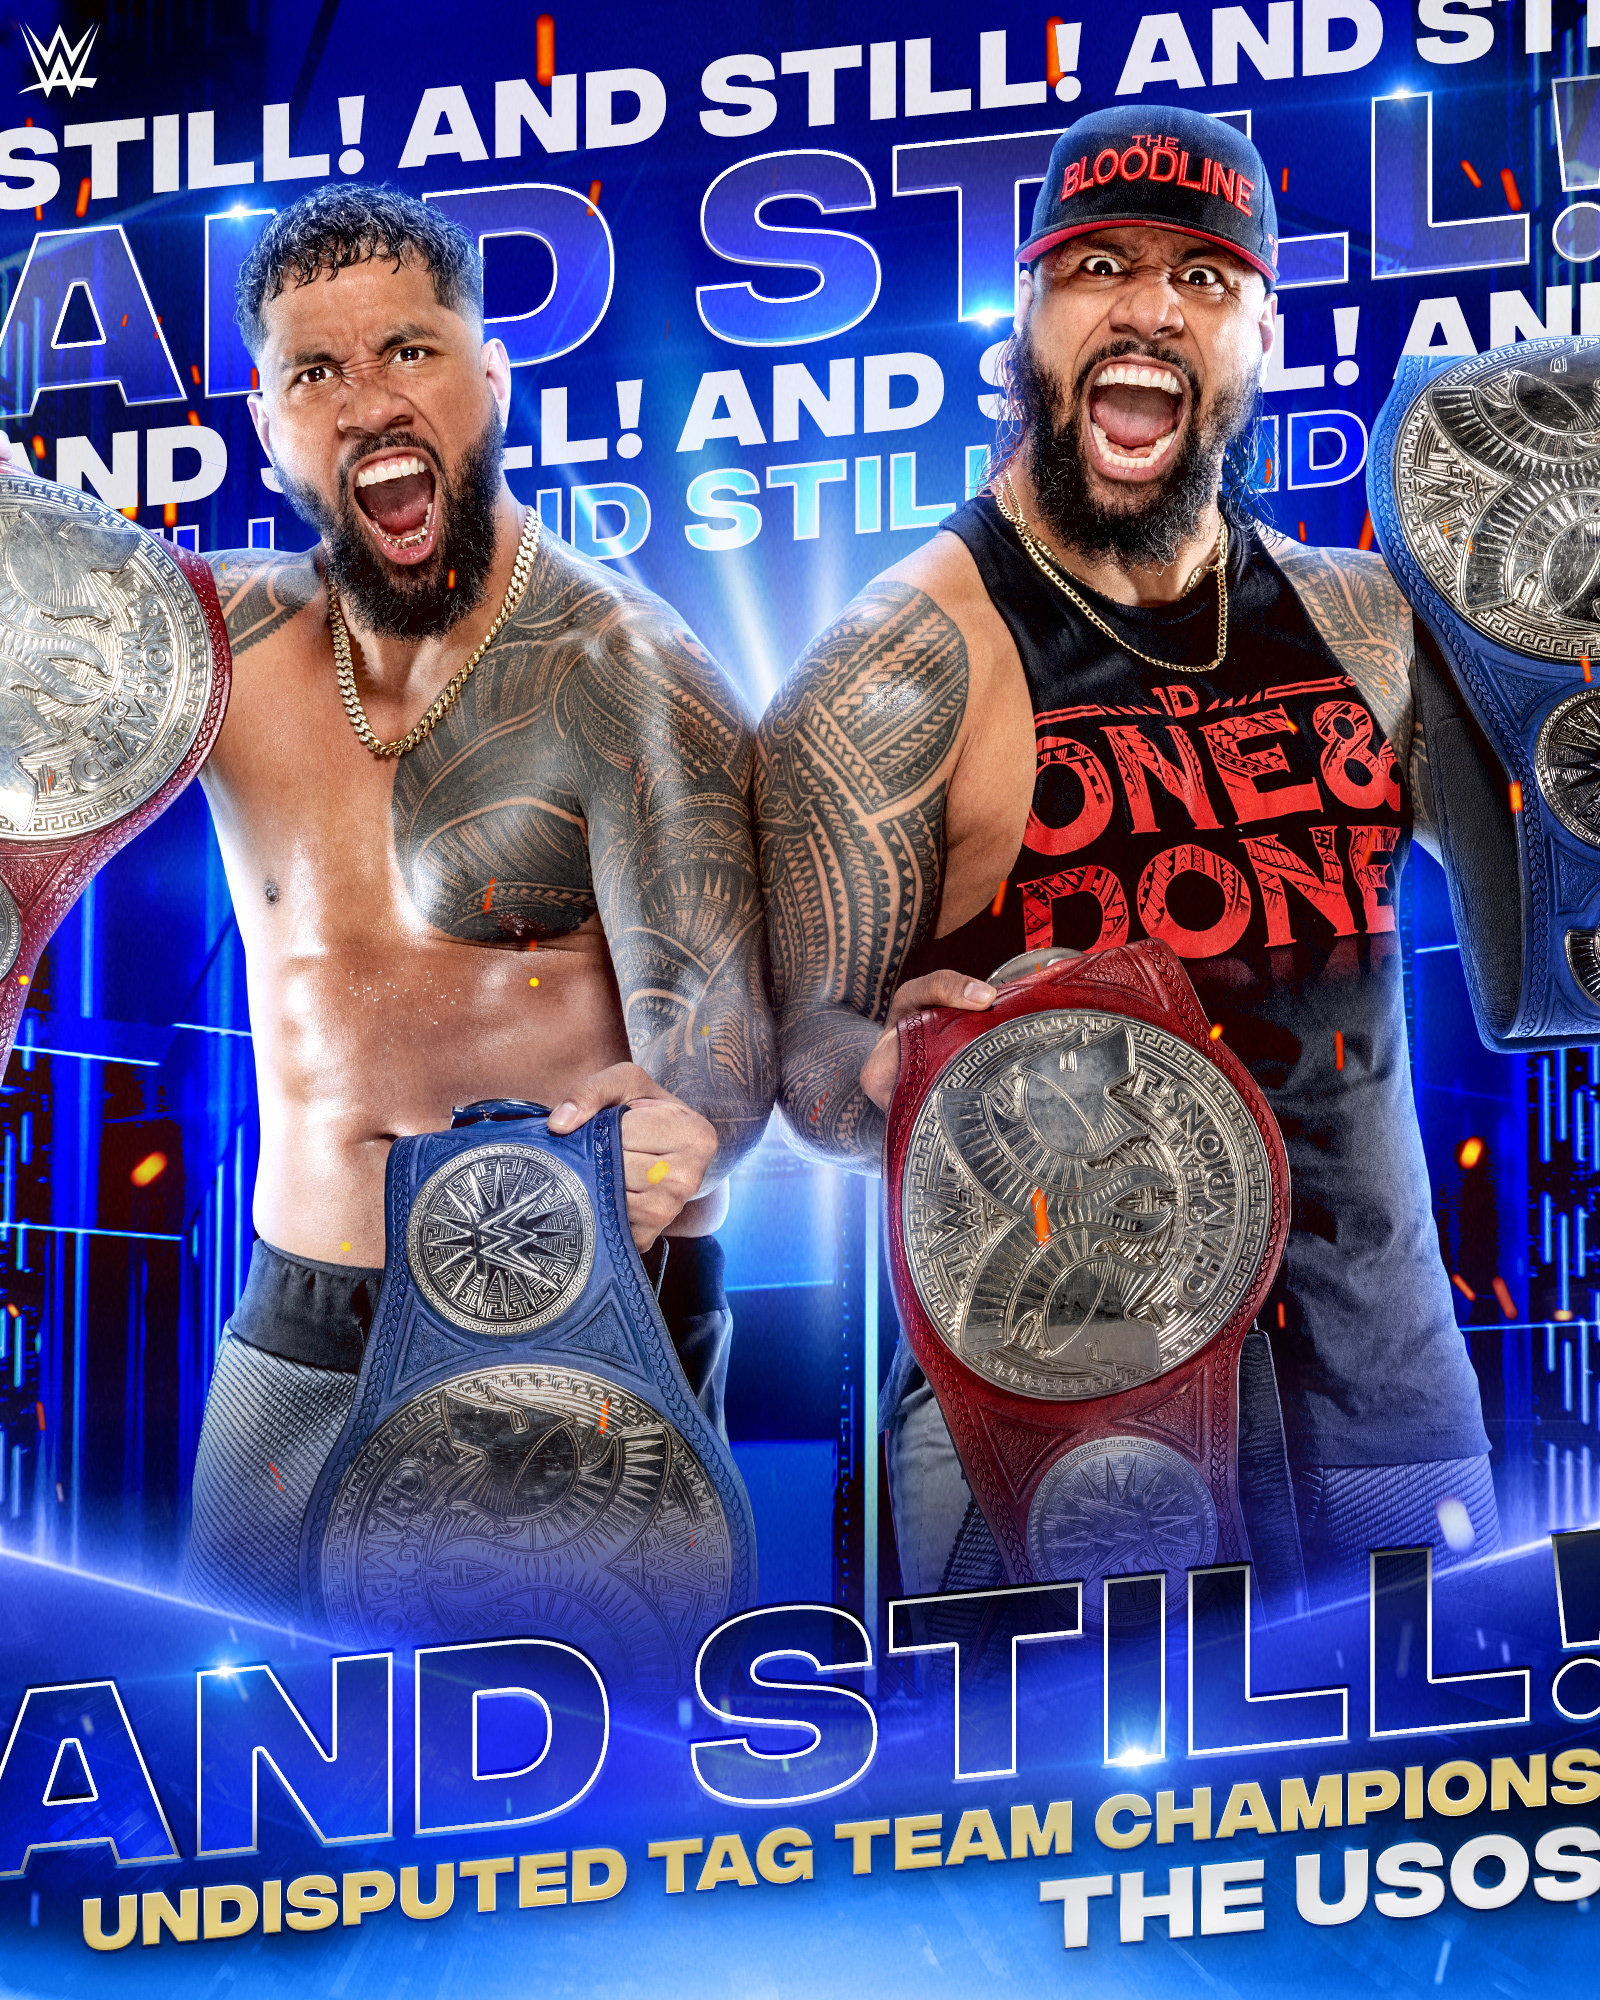 The Usos retained their WWE Tag Team title